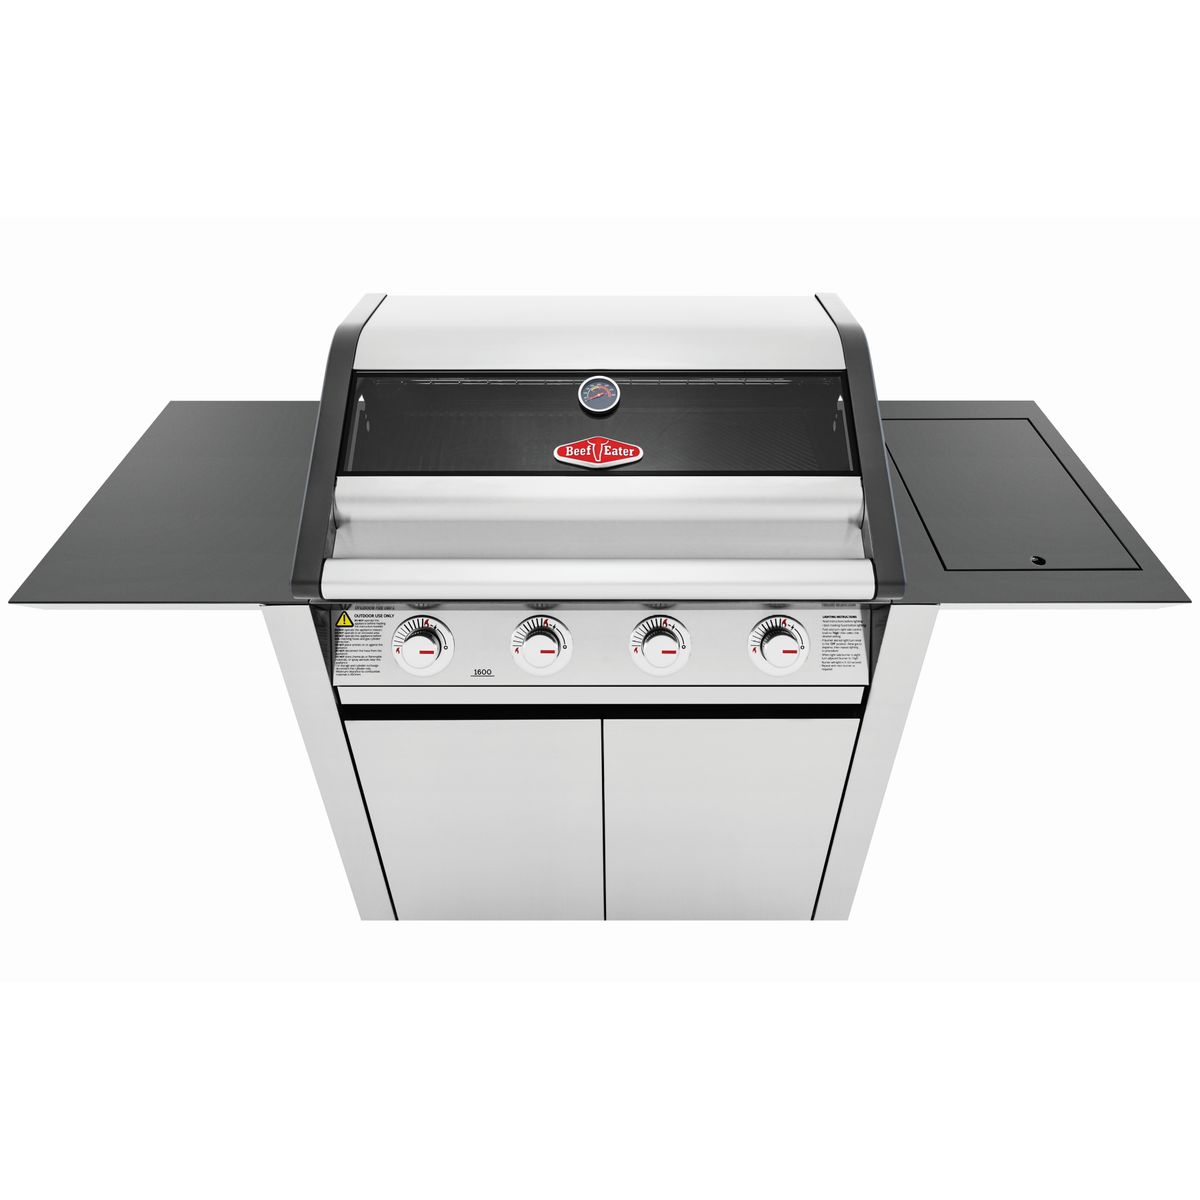 BeefEater 1600S Series 4 Burner Barbecue with Cabinet Trolley and Side Burner